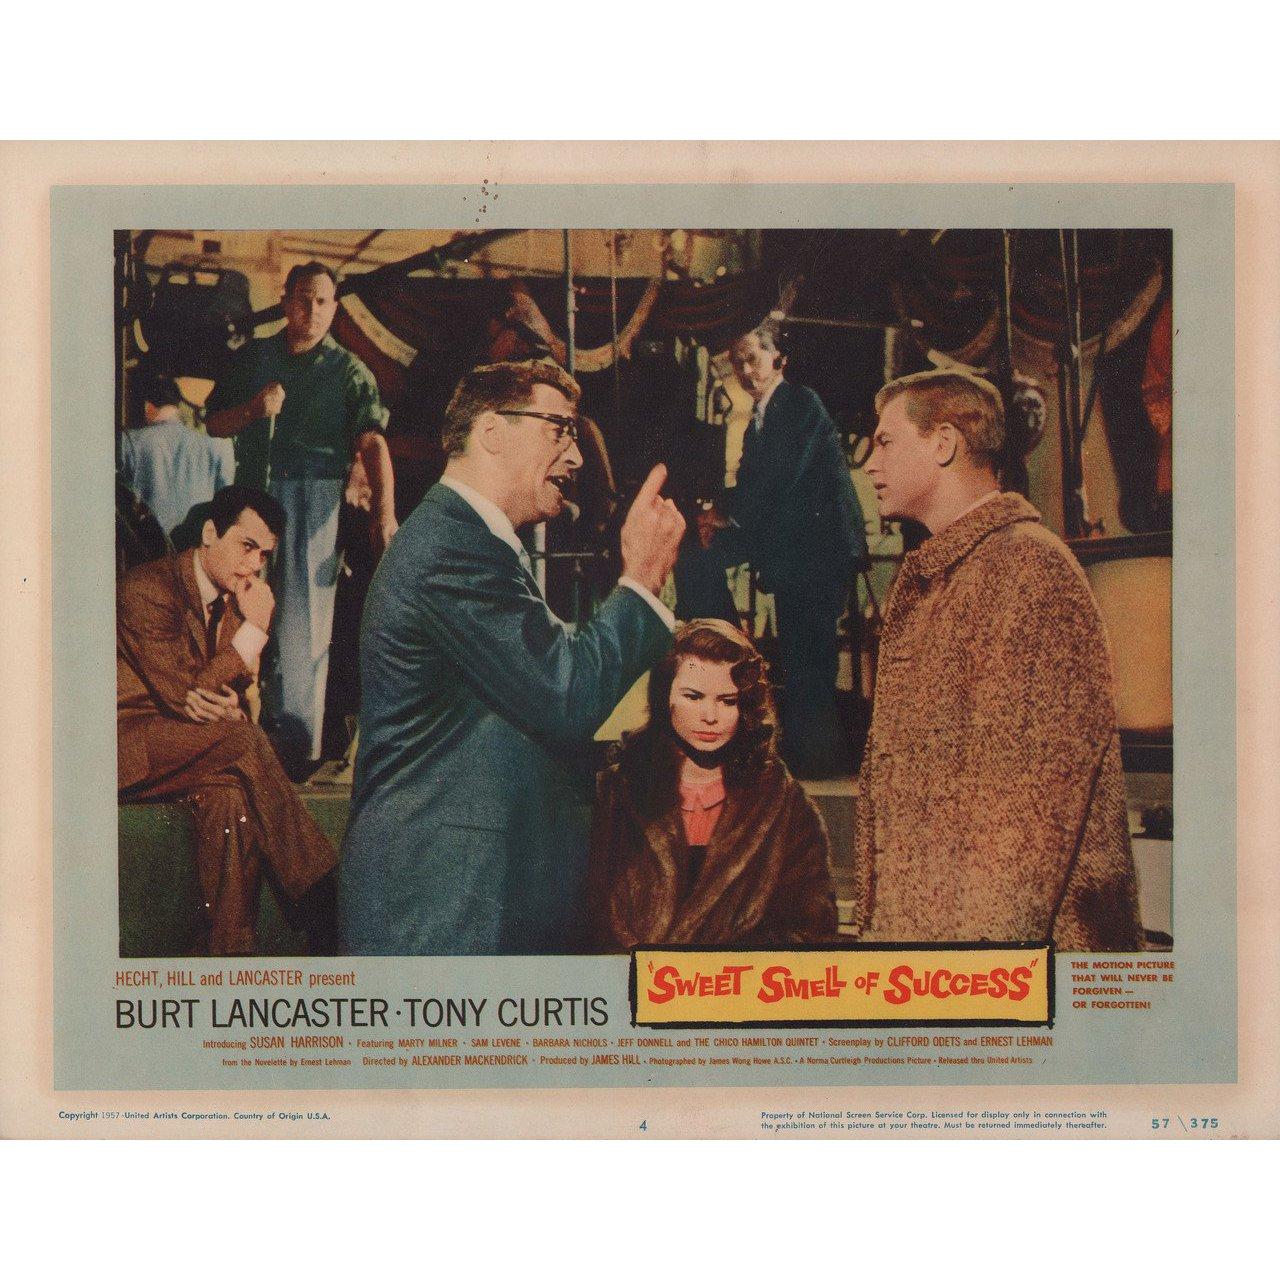 Original 1957 U.S. scene card for the film Sweet Smell of Success directed by Alexander Mackendrick with Burt Lancaster / Tony Curtis / Susan Harrison / Martin Milner. Very good-fine condition. Please note: the size is stated in inches and the